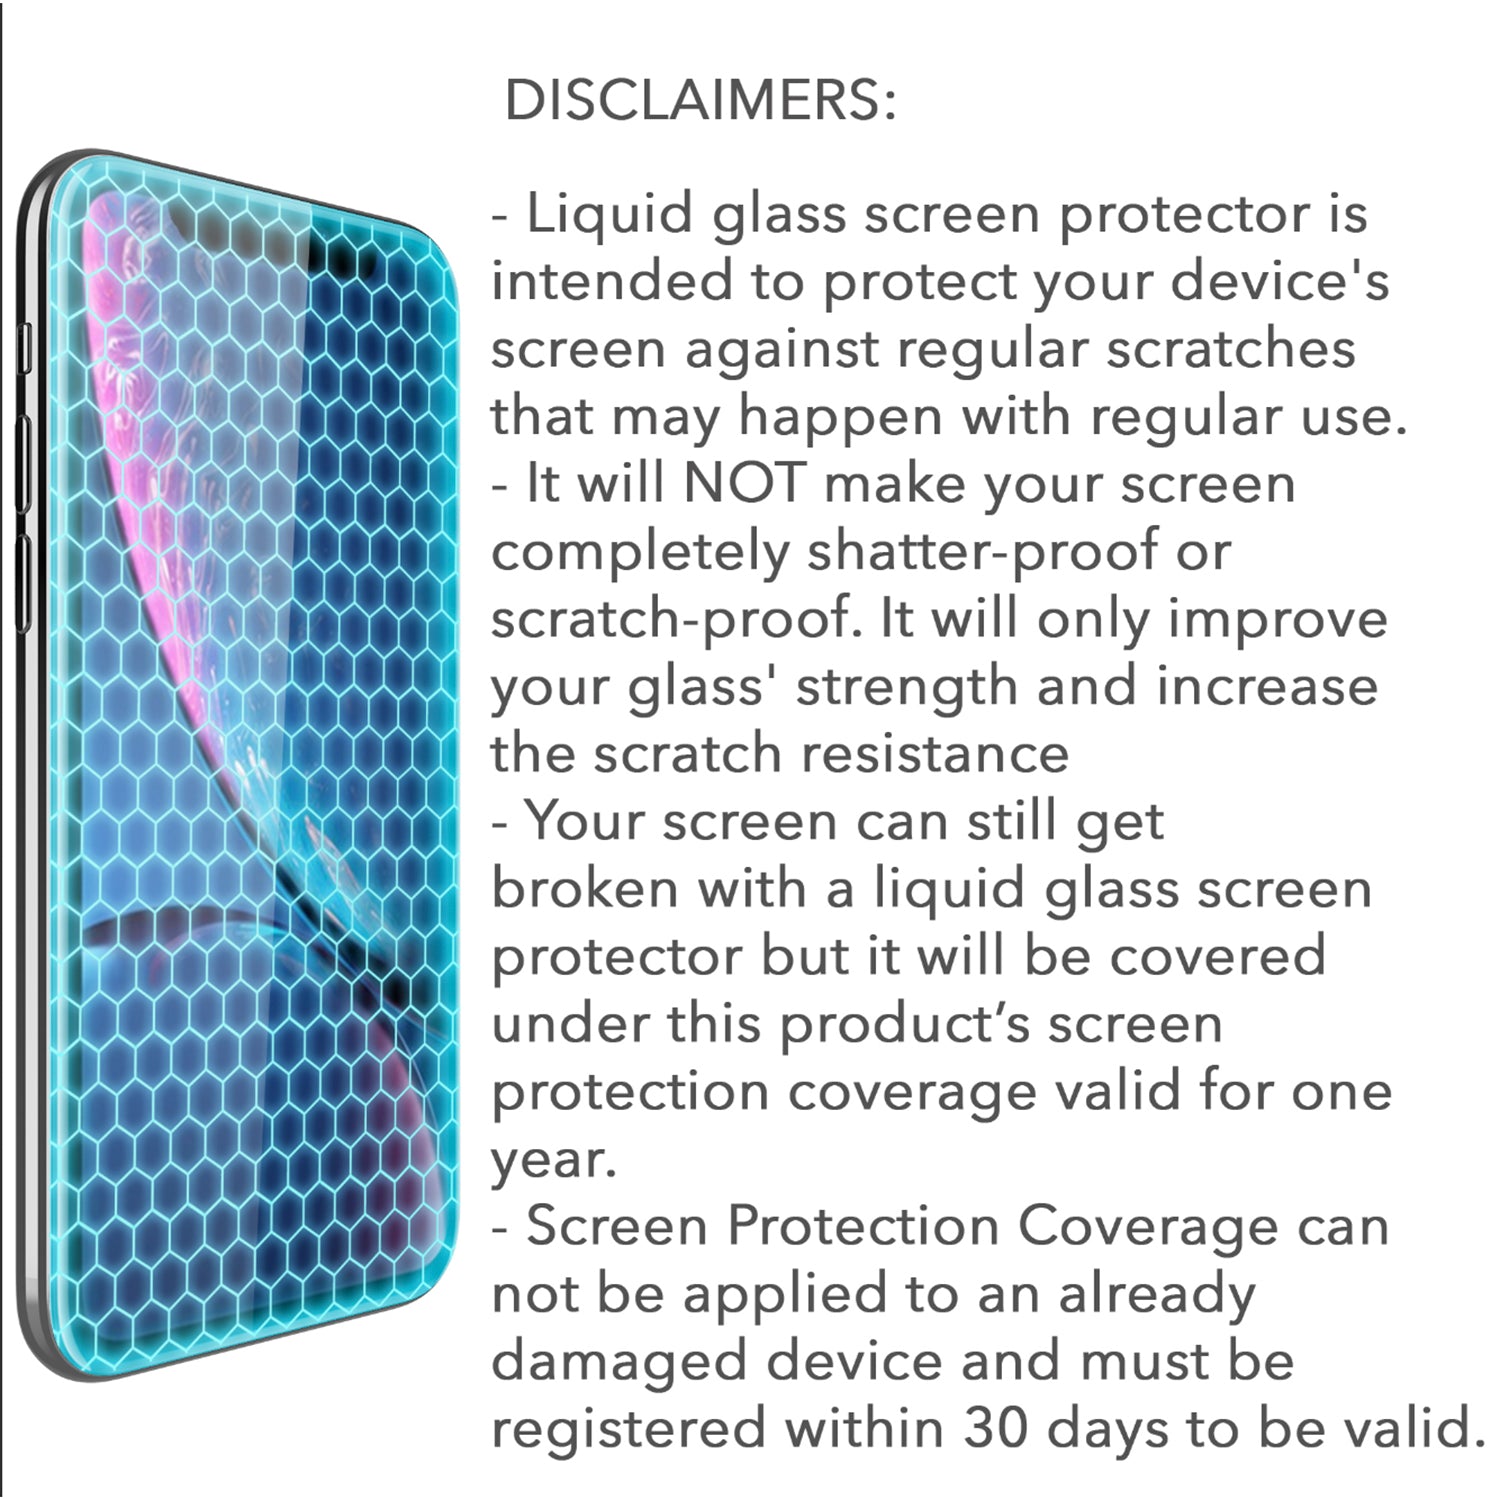 3 Pack Liquid Glass Screen Protector with $500 Screen Protection - Universal